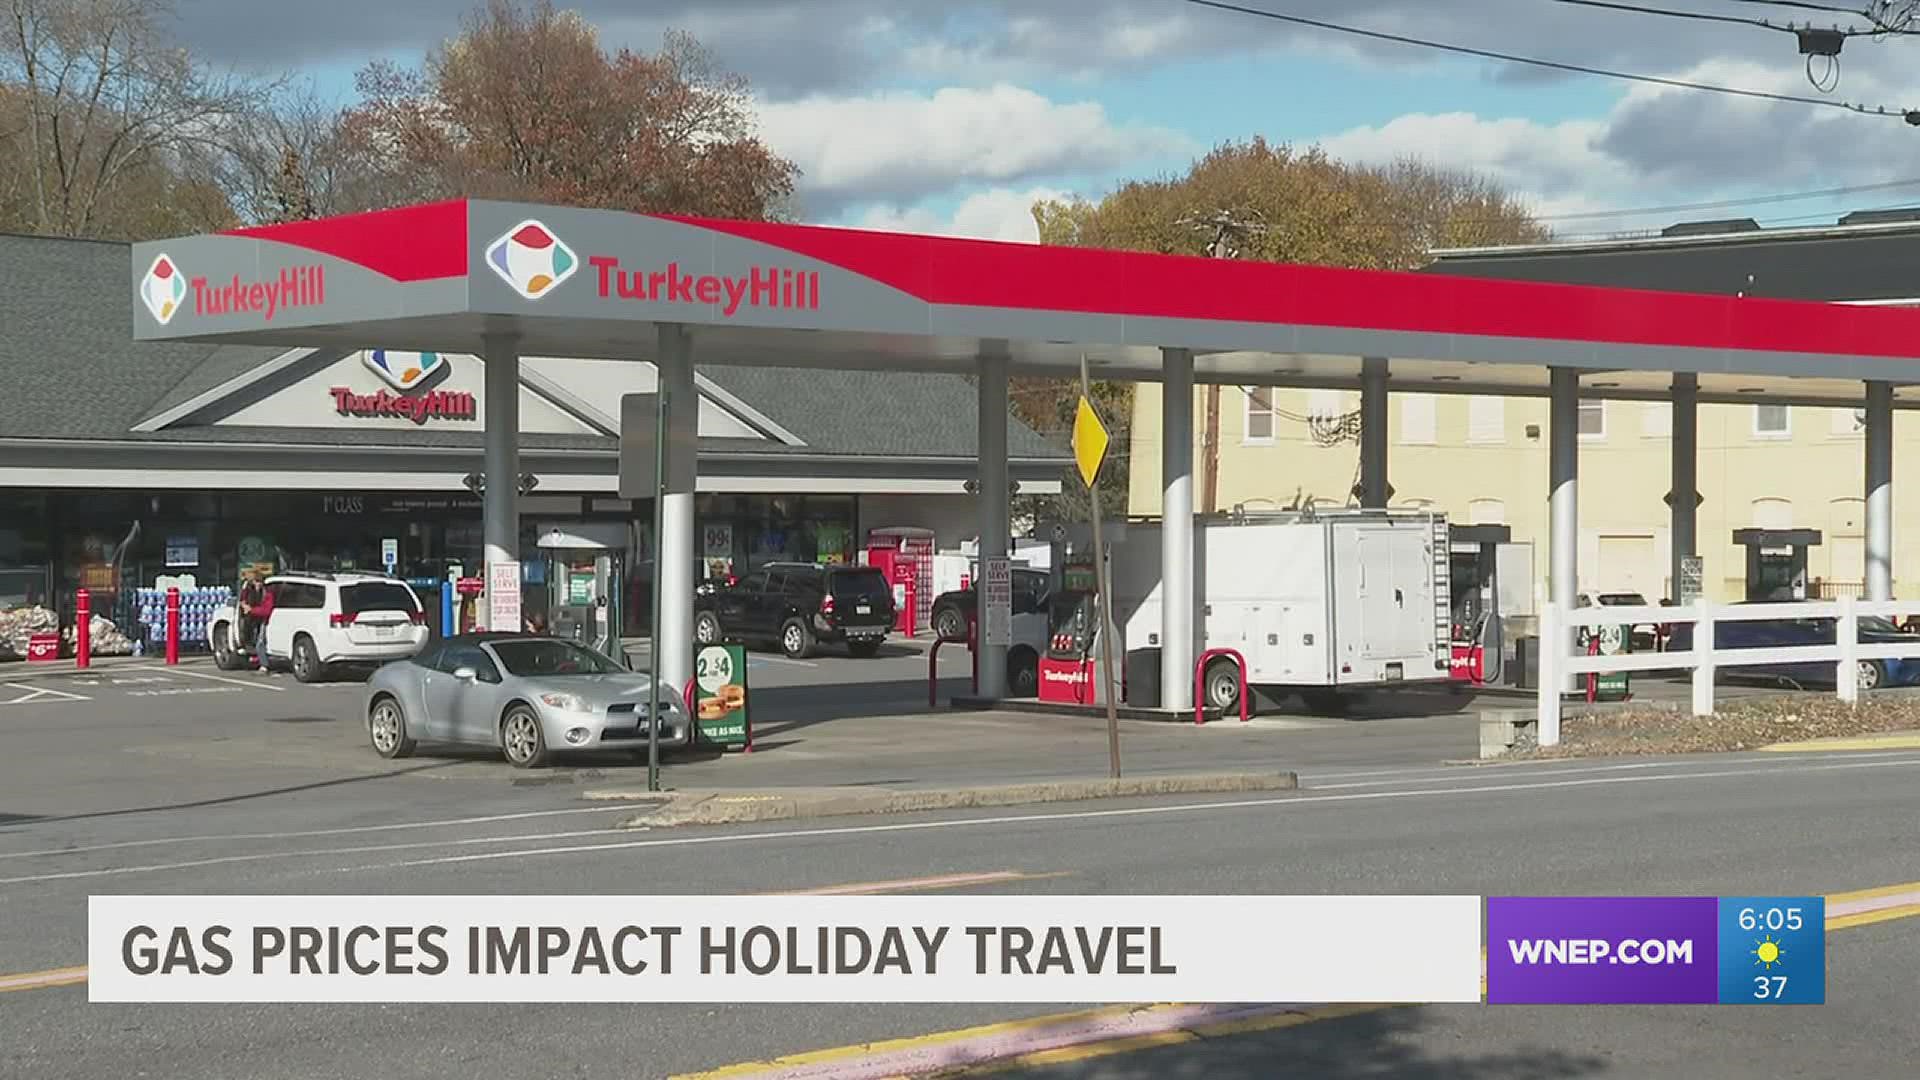 Pain at the pump could keep more drivers at home this Thanksgiving. A new survey suggests many Americans are deciding not to get behind the wheel for the holiday.